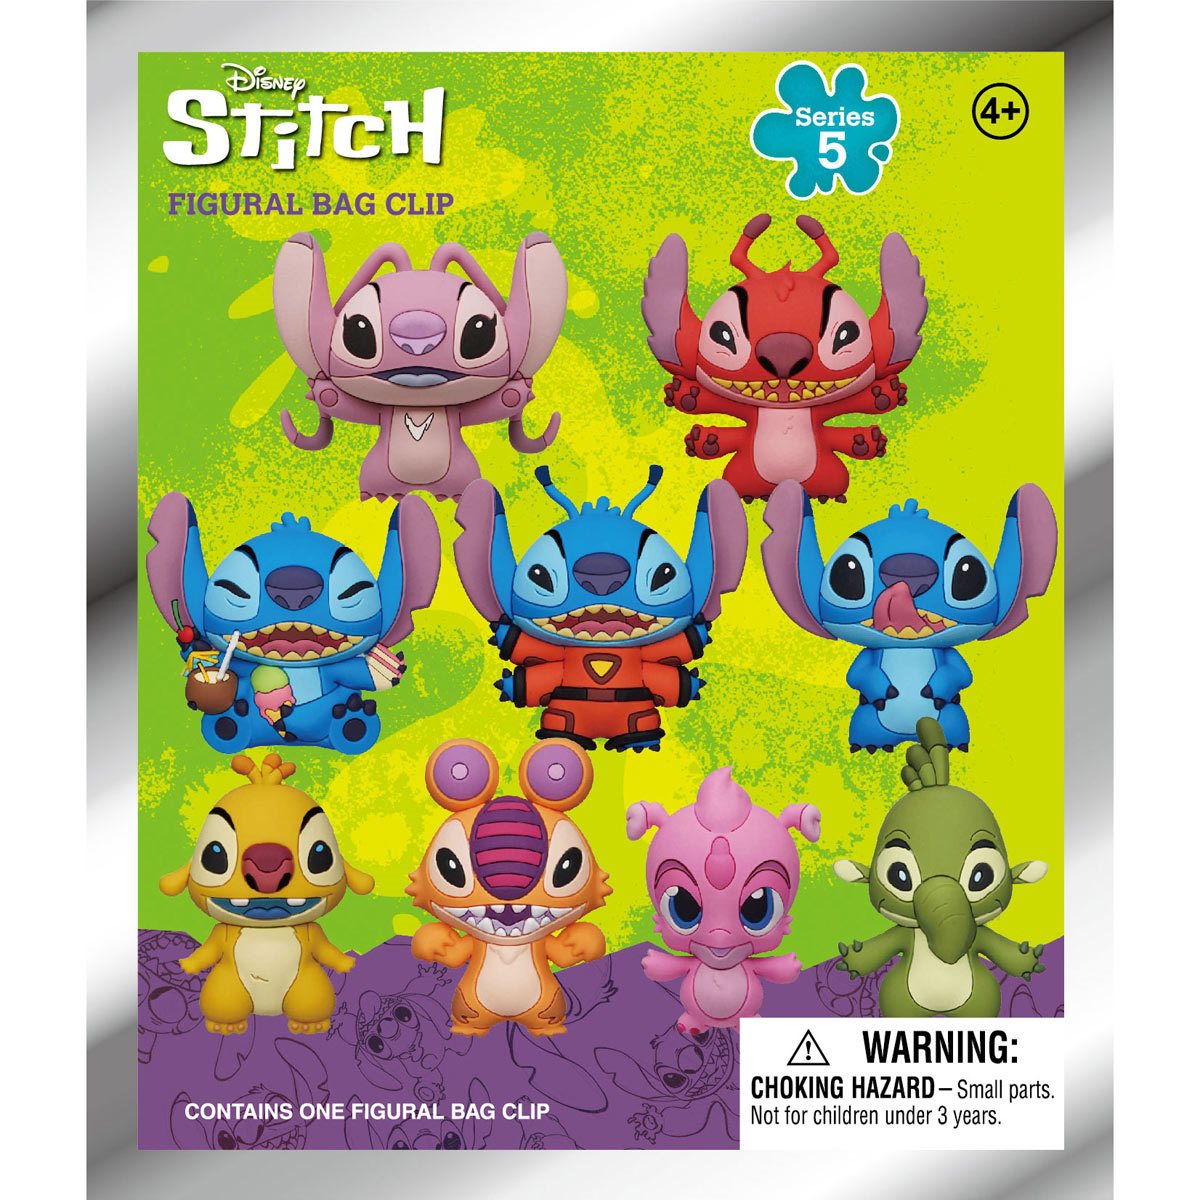 Collection of Lilo & Stitch Items